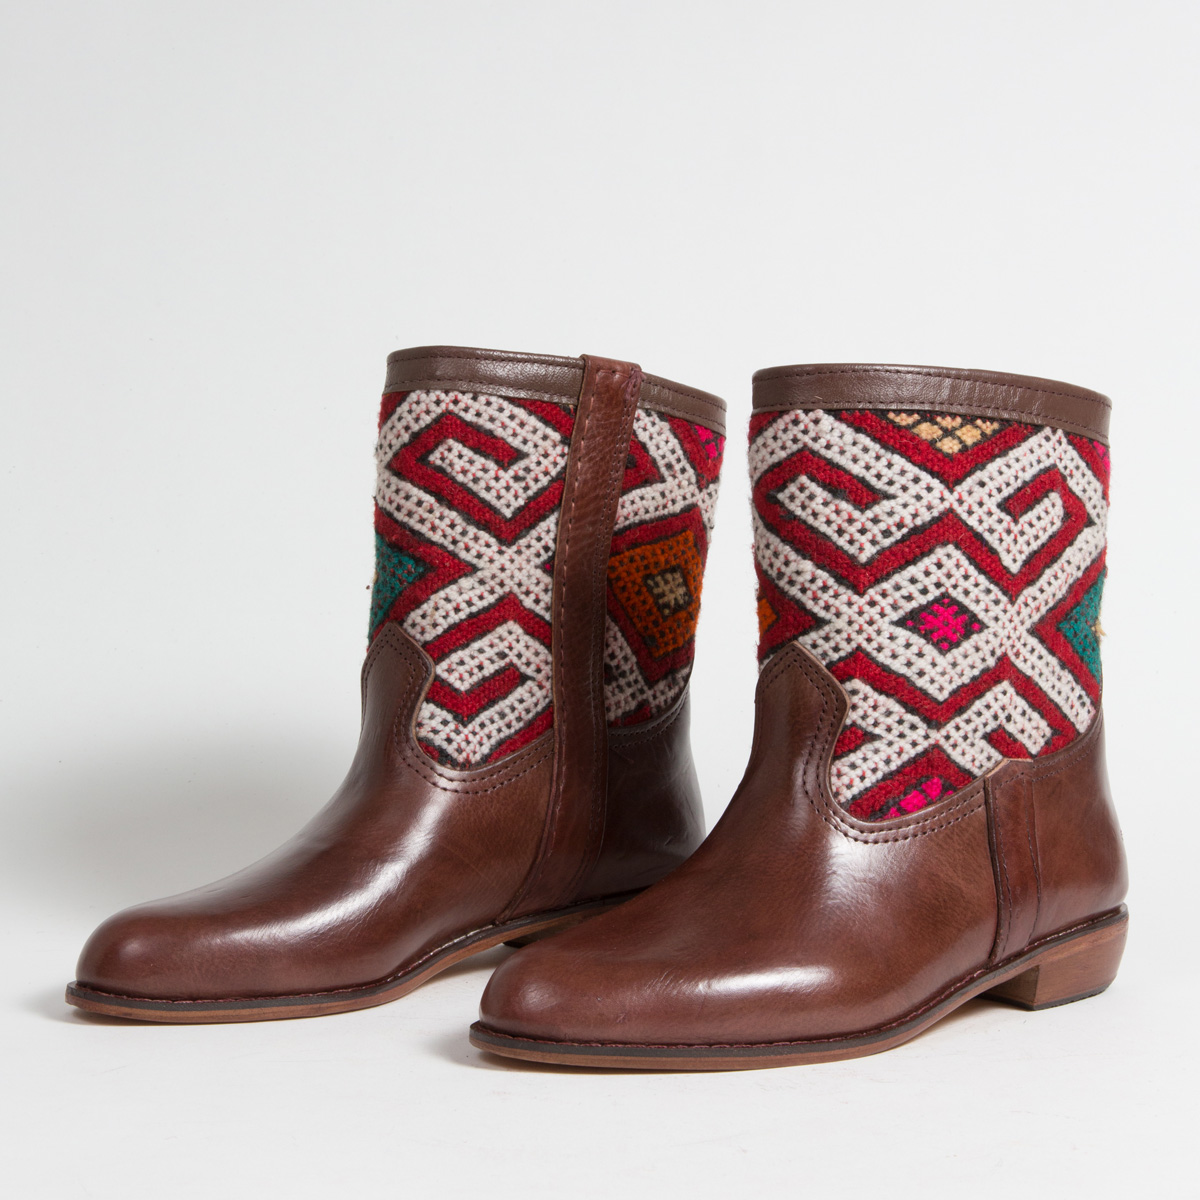 Bottines Kilim cuir mababouche artisanales (Réf. CB5-40)